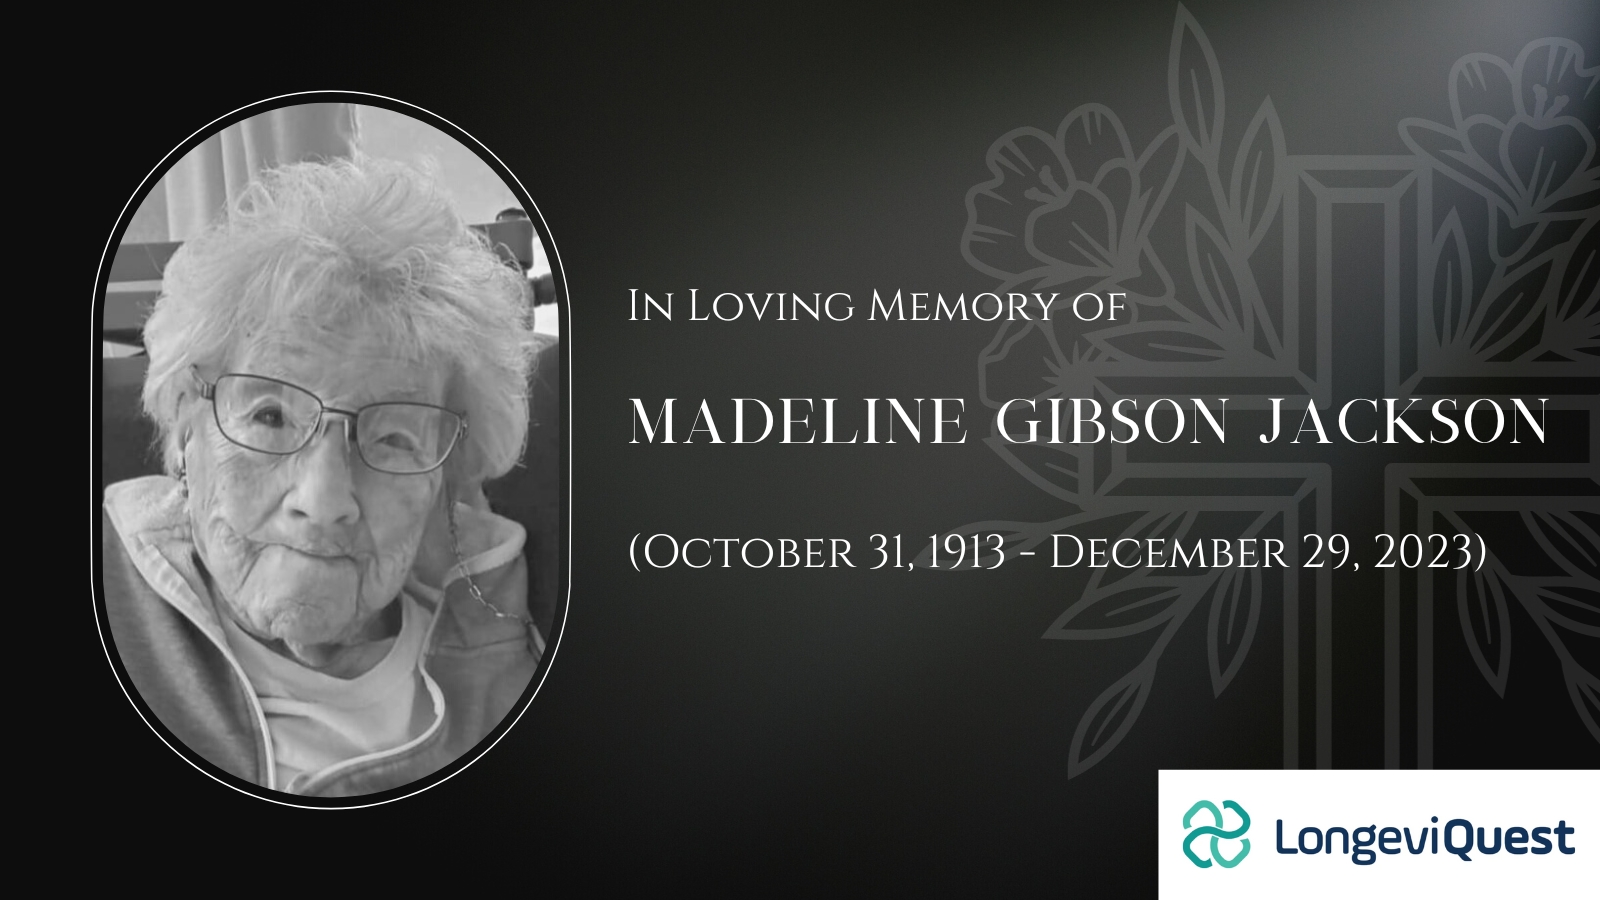 Madeline Jackson of the United States Dies at 110